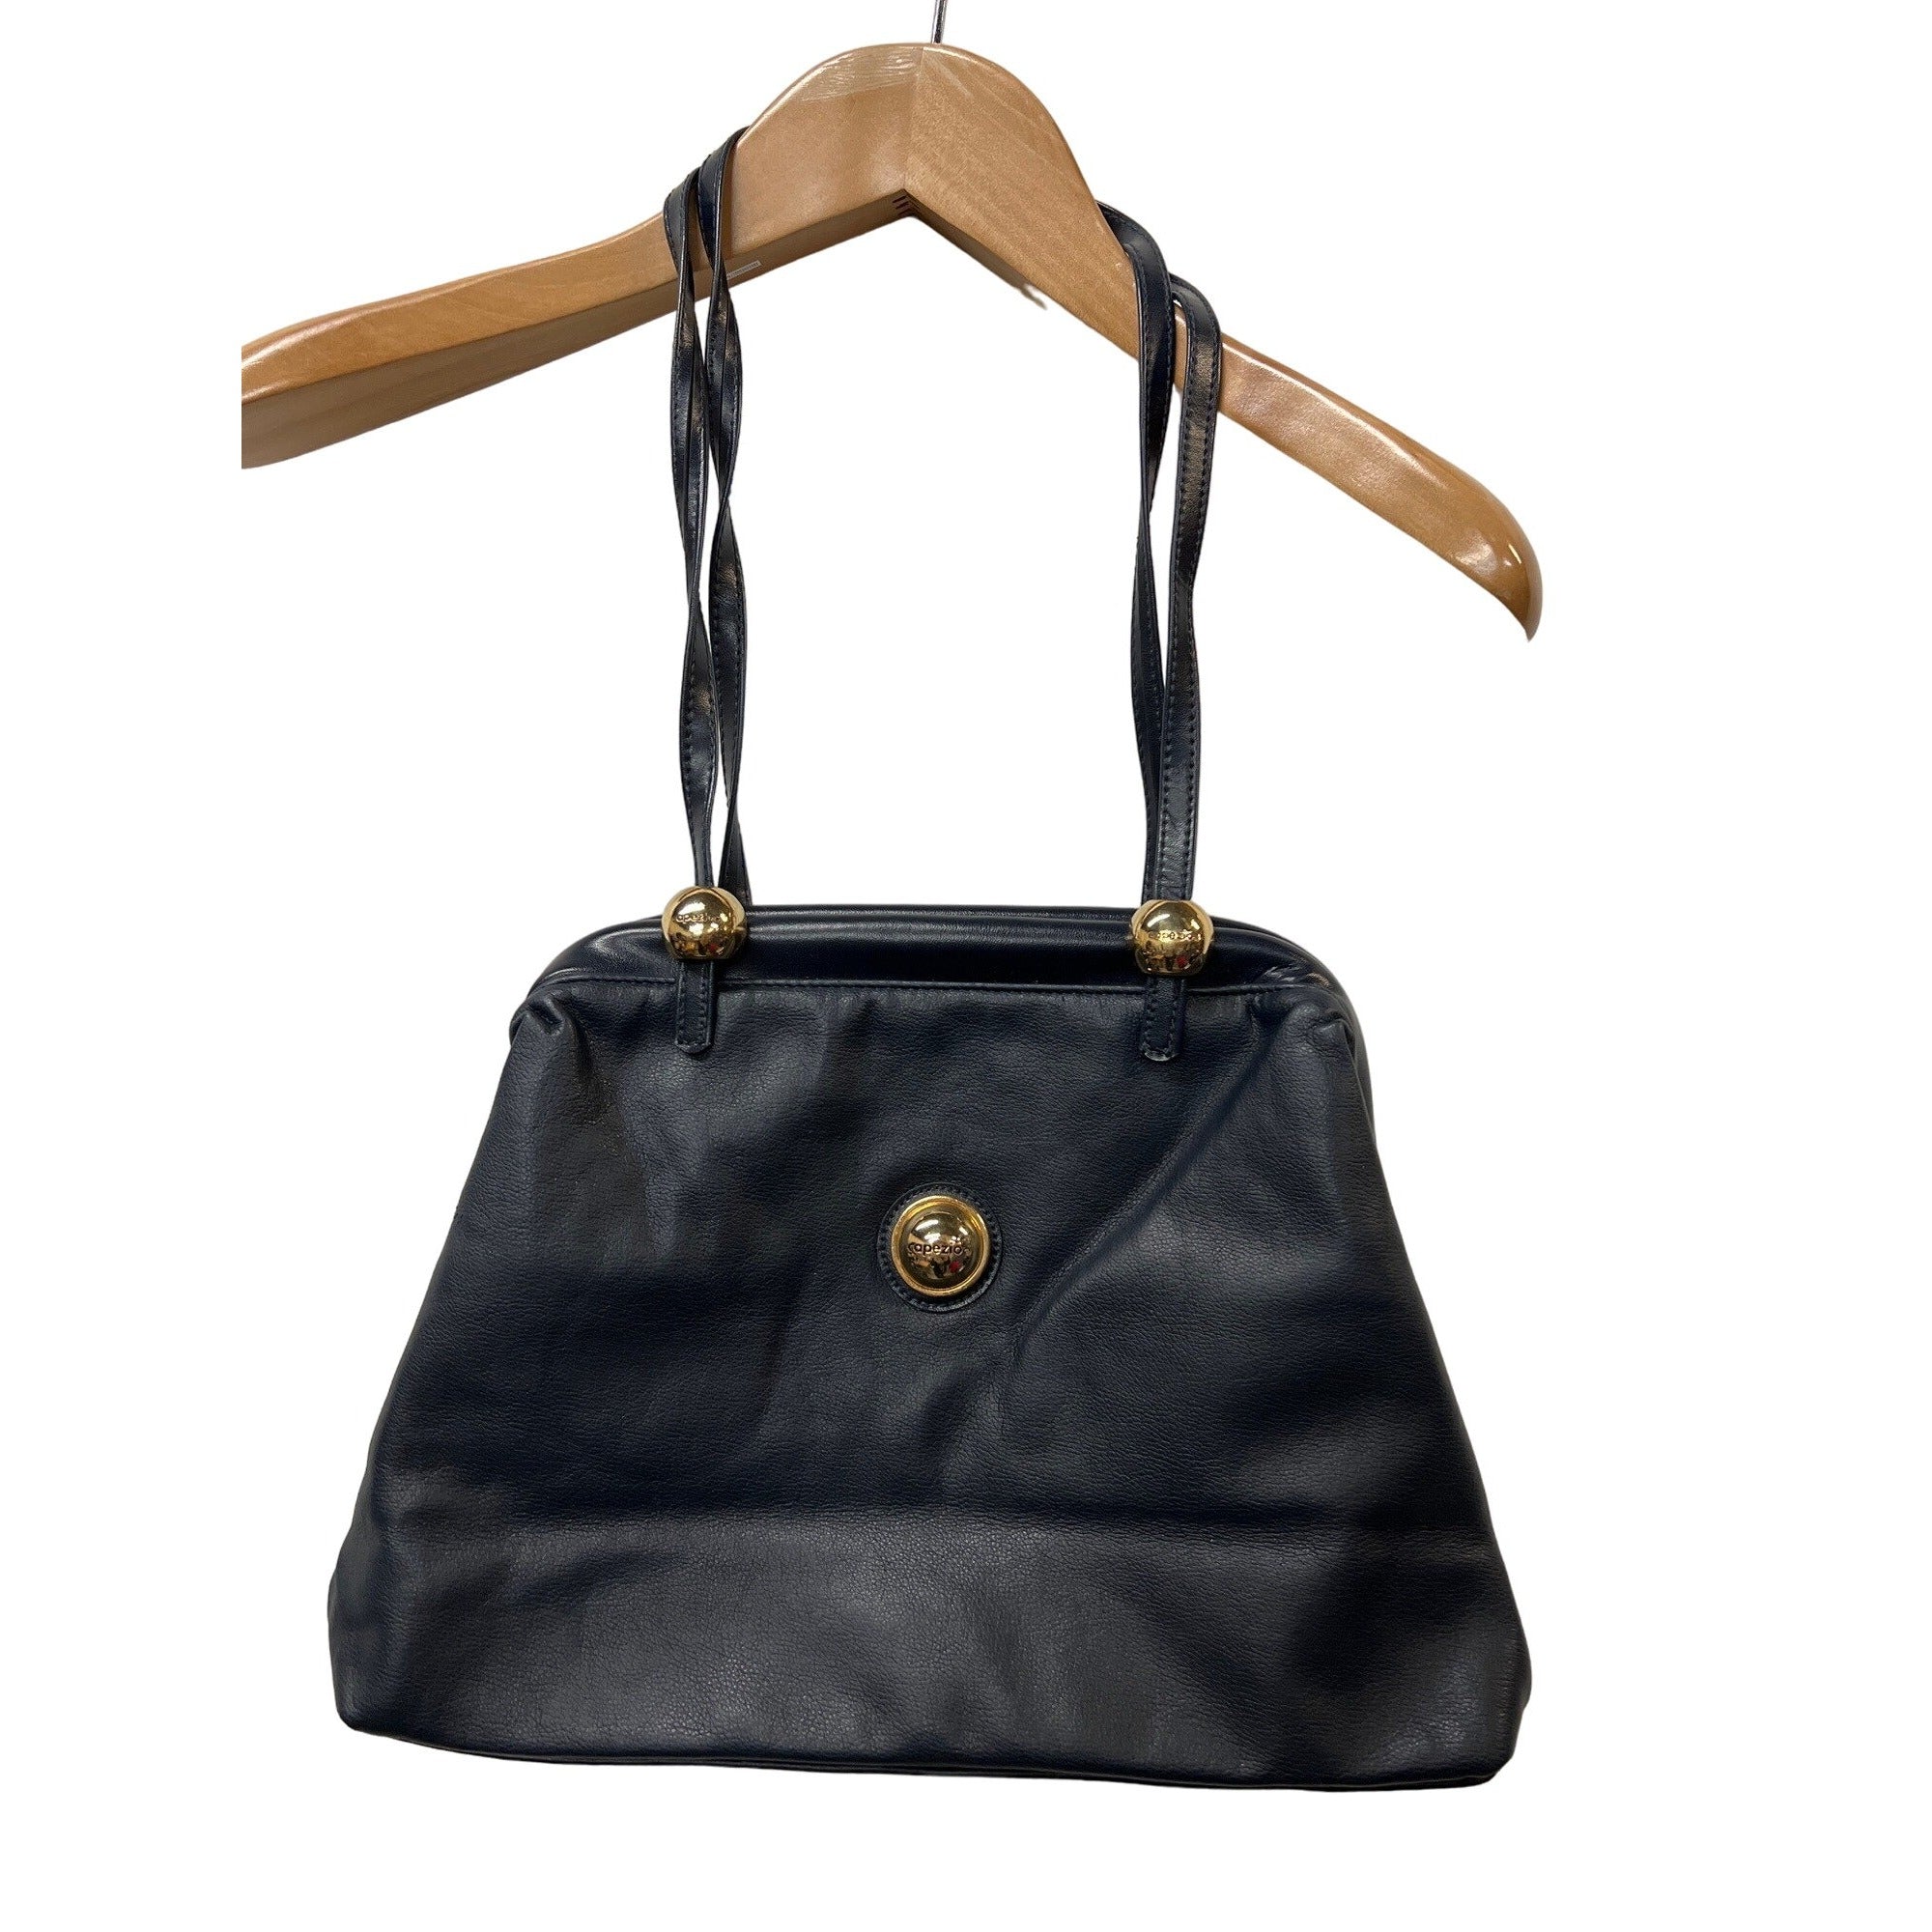 Premium Photo | Women39s dark blue leather bag with a flap top handle gold  chain front view the trendy purse